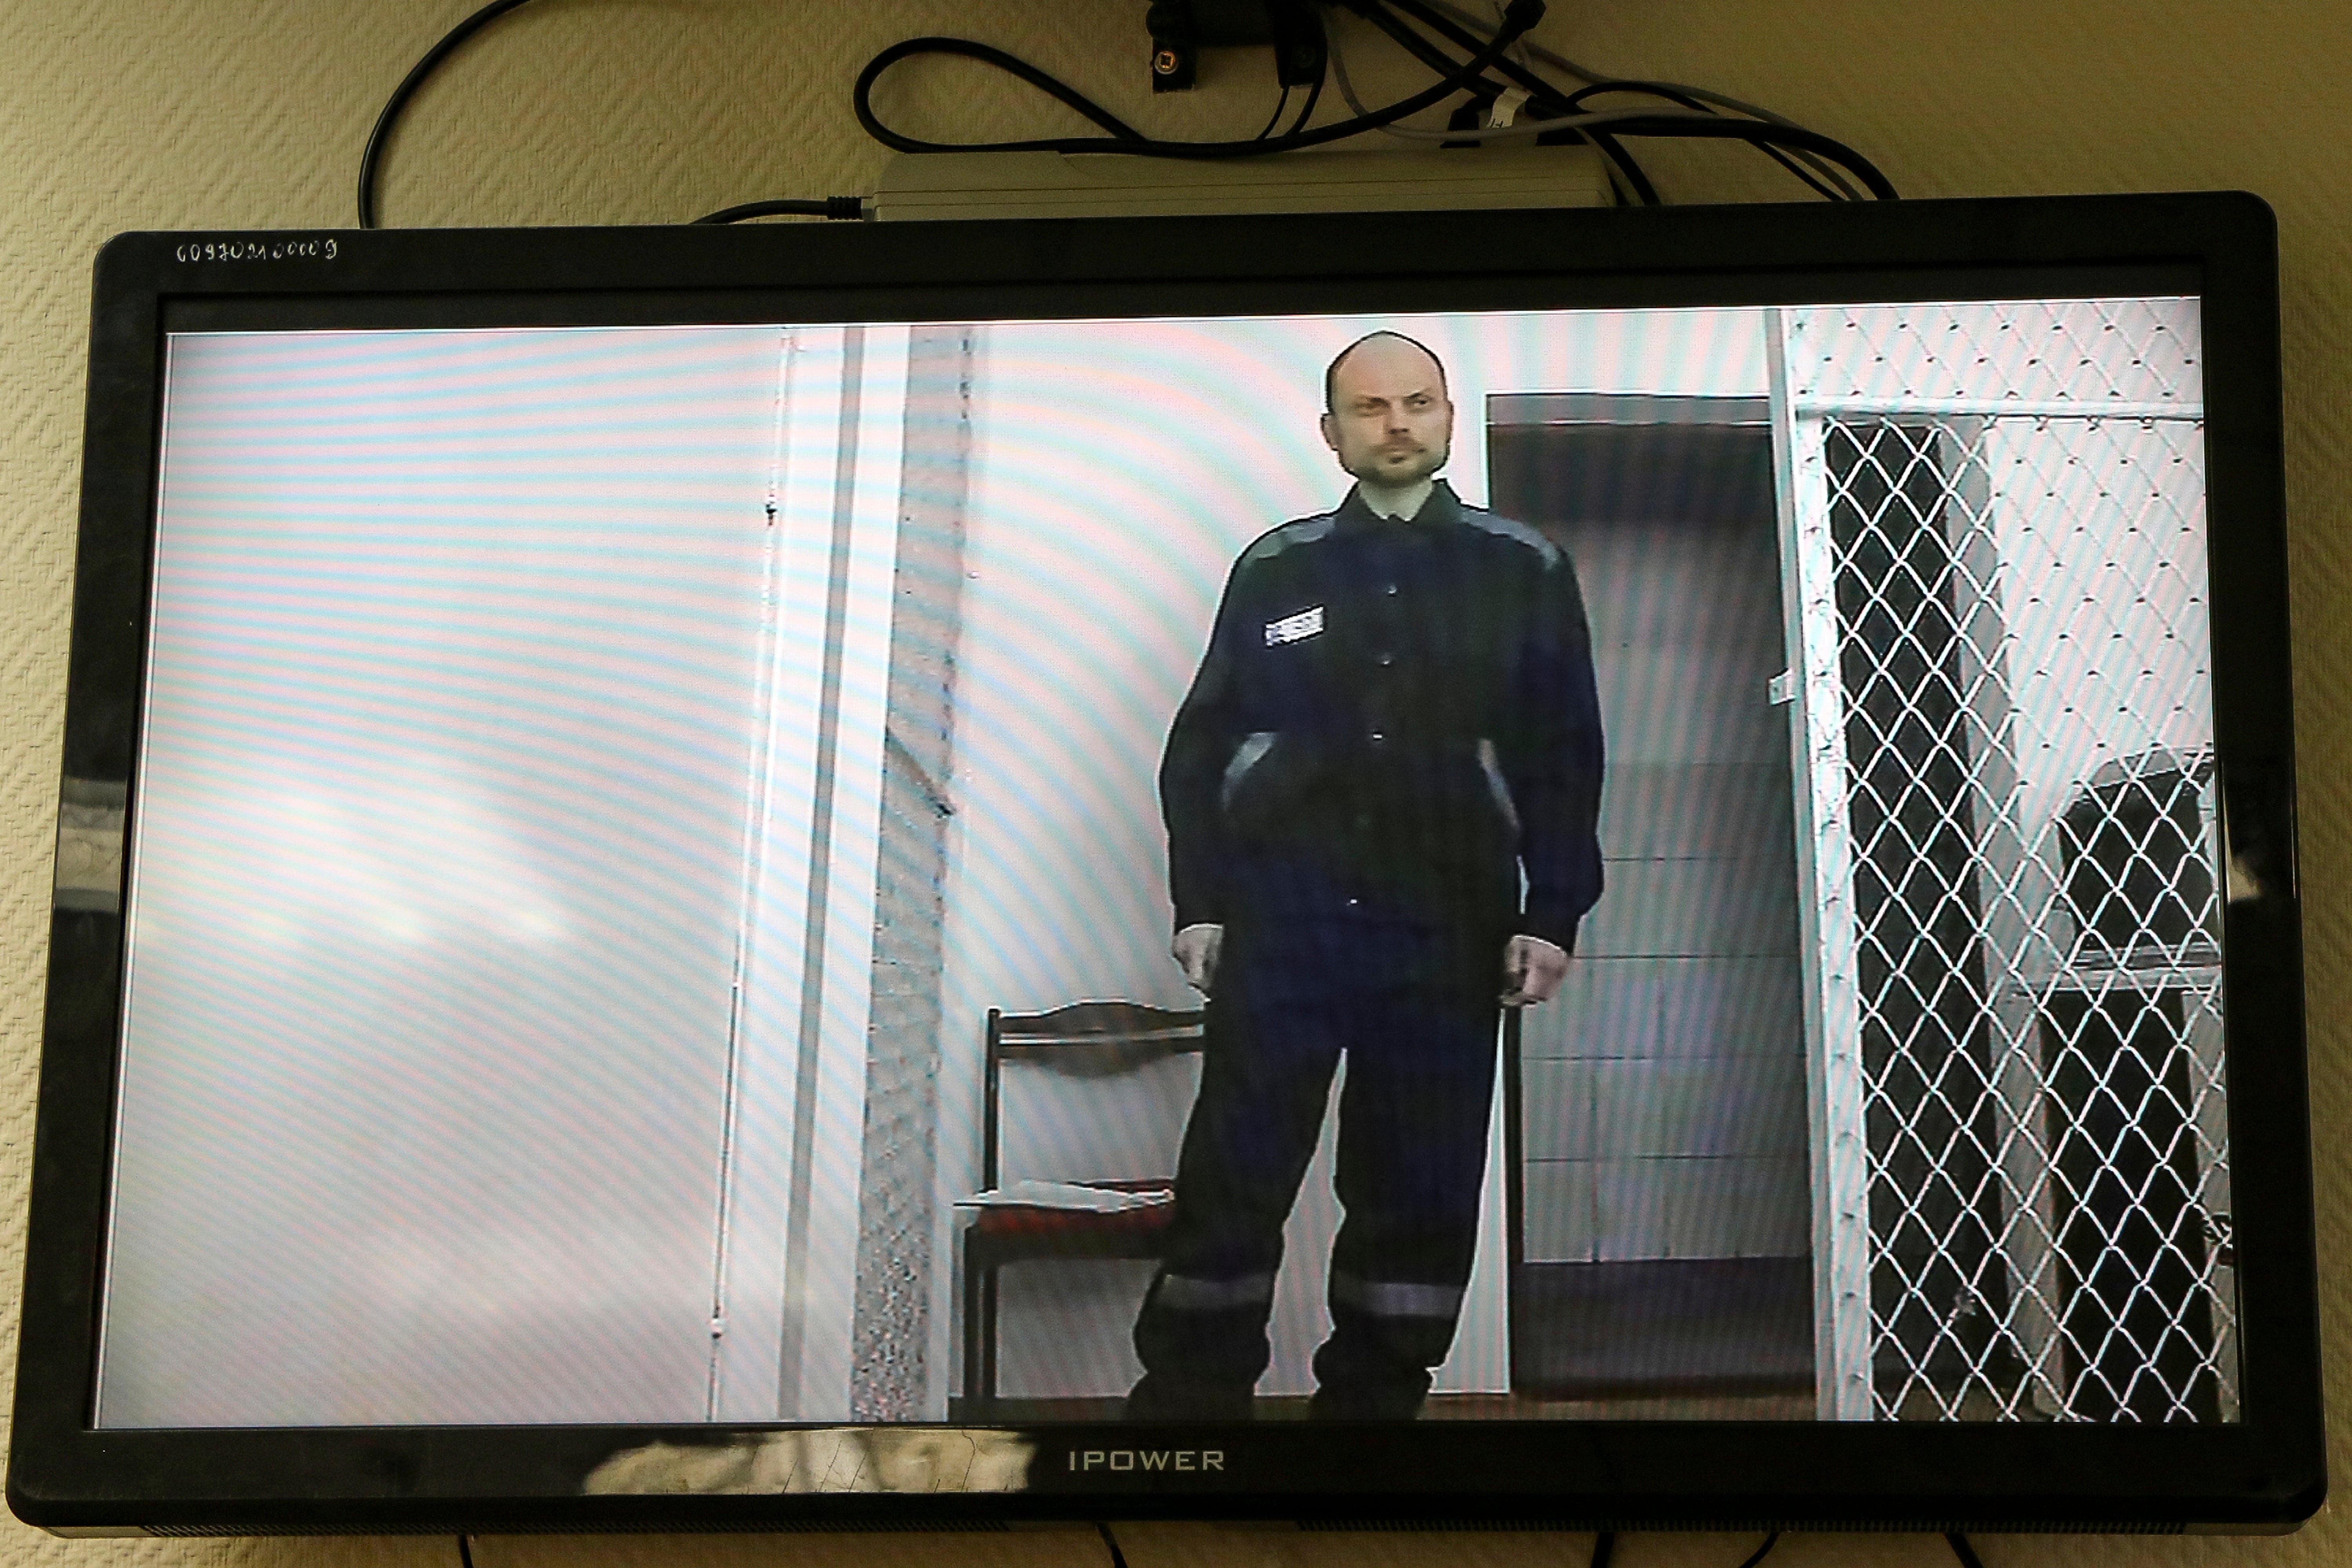 Kara-Murza in court via video feed from prison